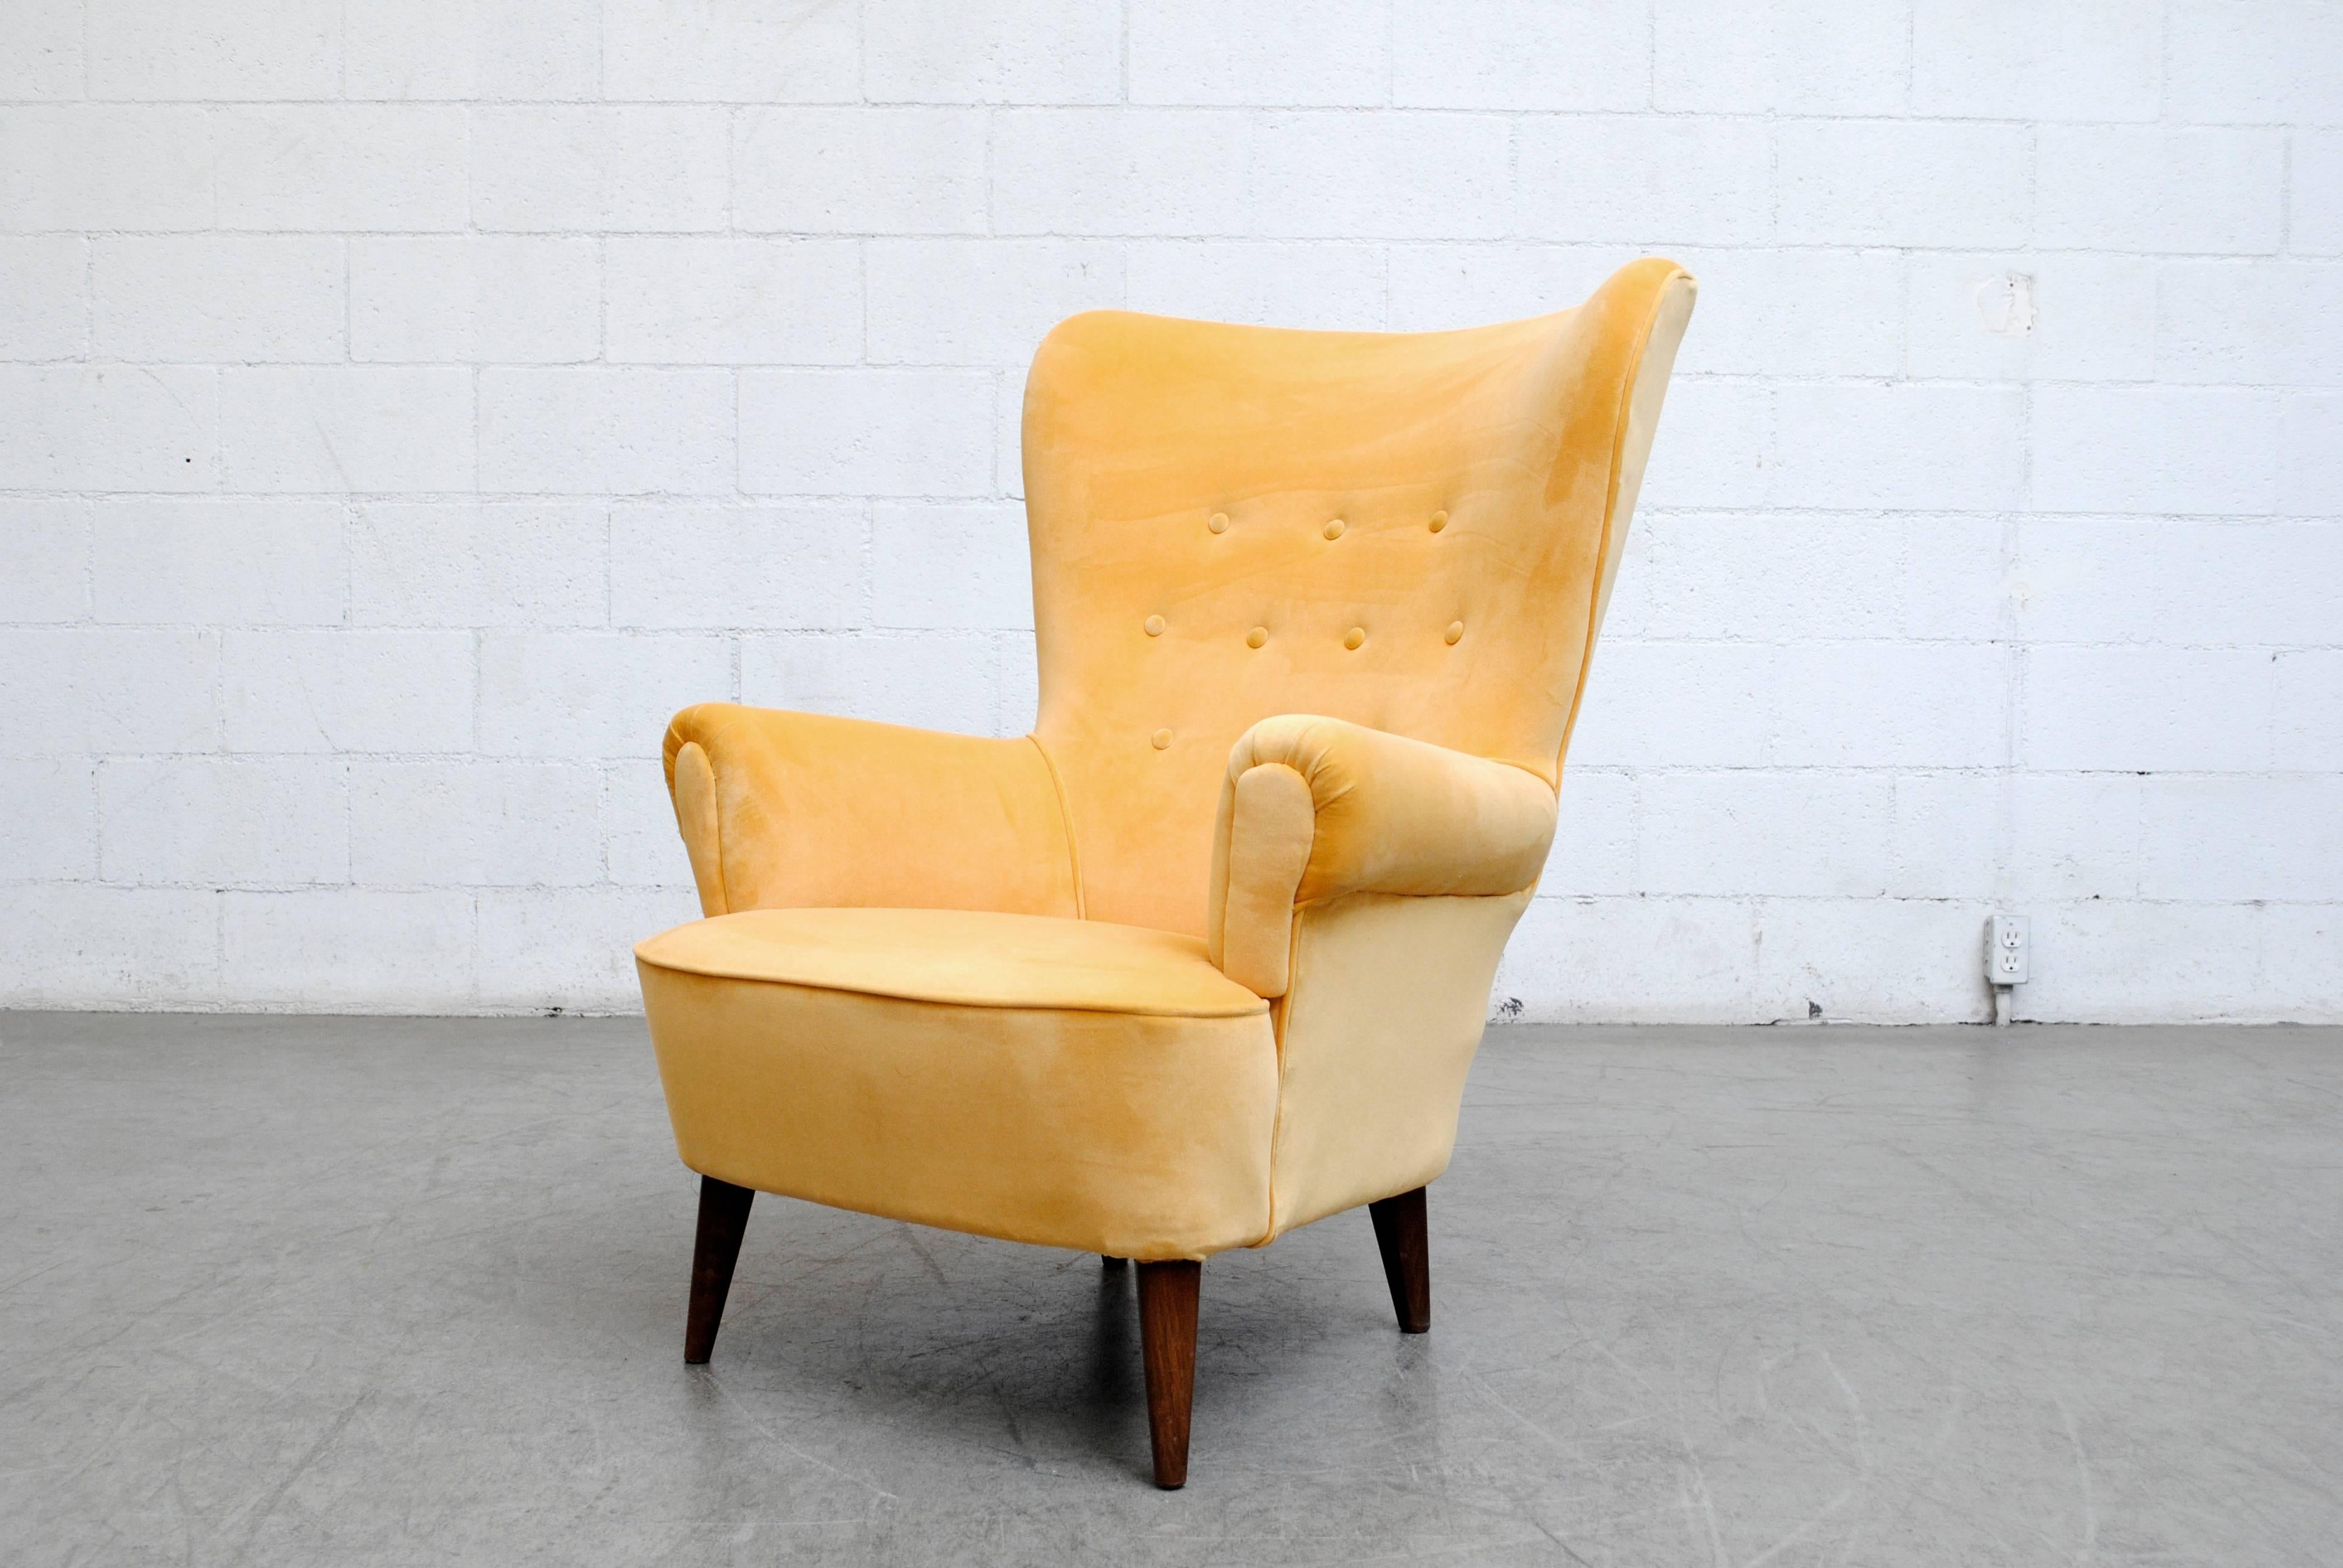 Impressive Theo Ruth winged back lounge armchair for Artifort in brand new canary yellow velvet upholstery. Legs are lightly refinished.